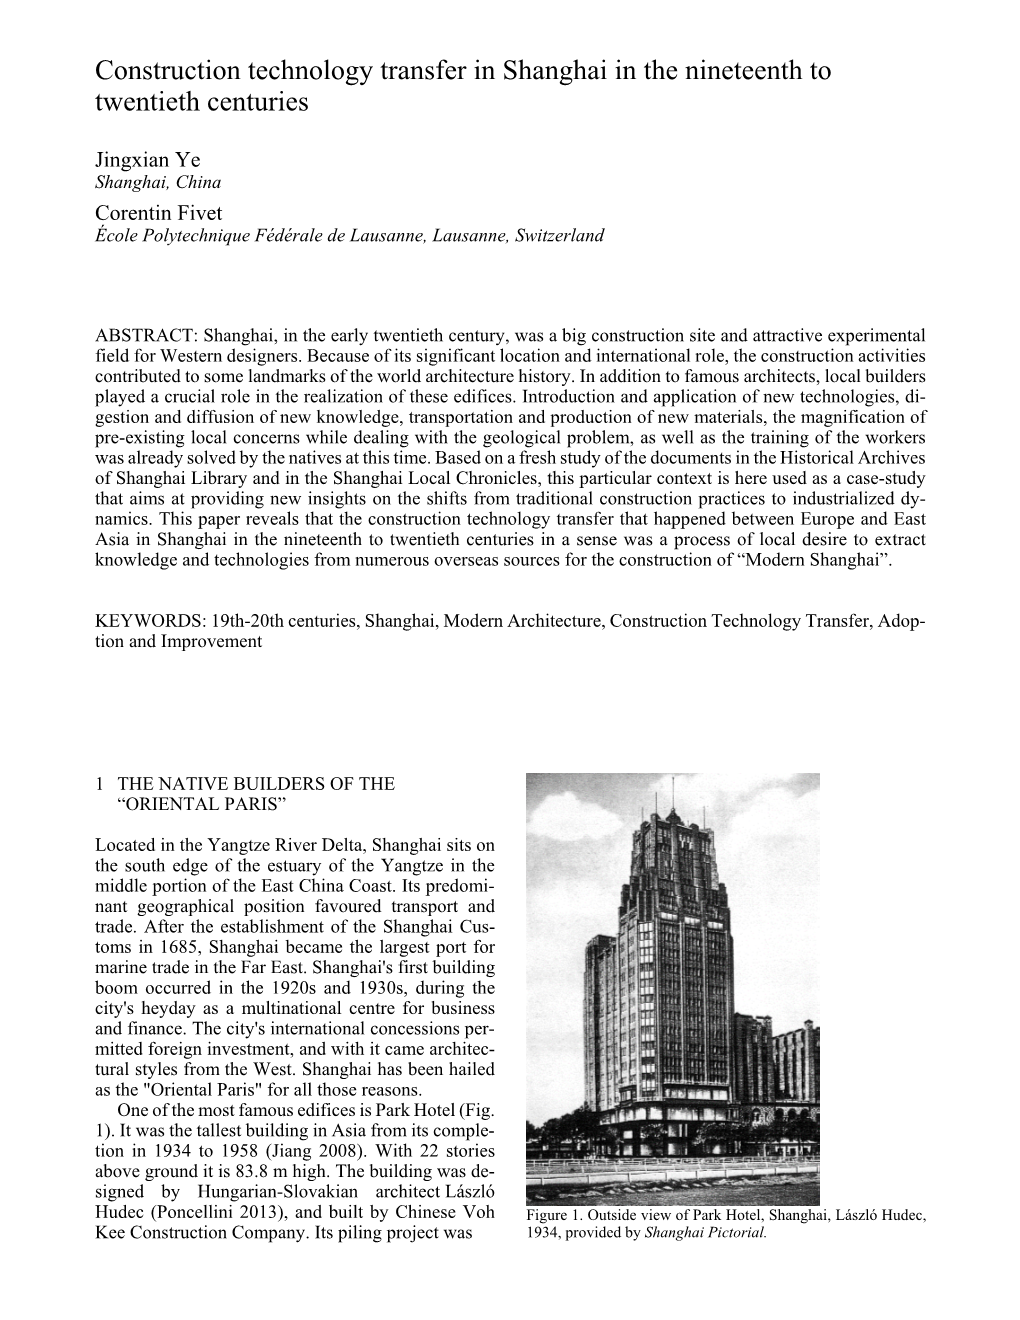 Construction Technology Transfer in Shanghai in the Nineteenth to Twentieth Centuries